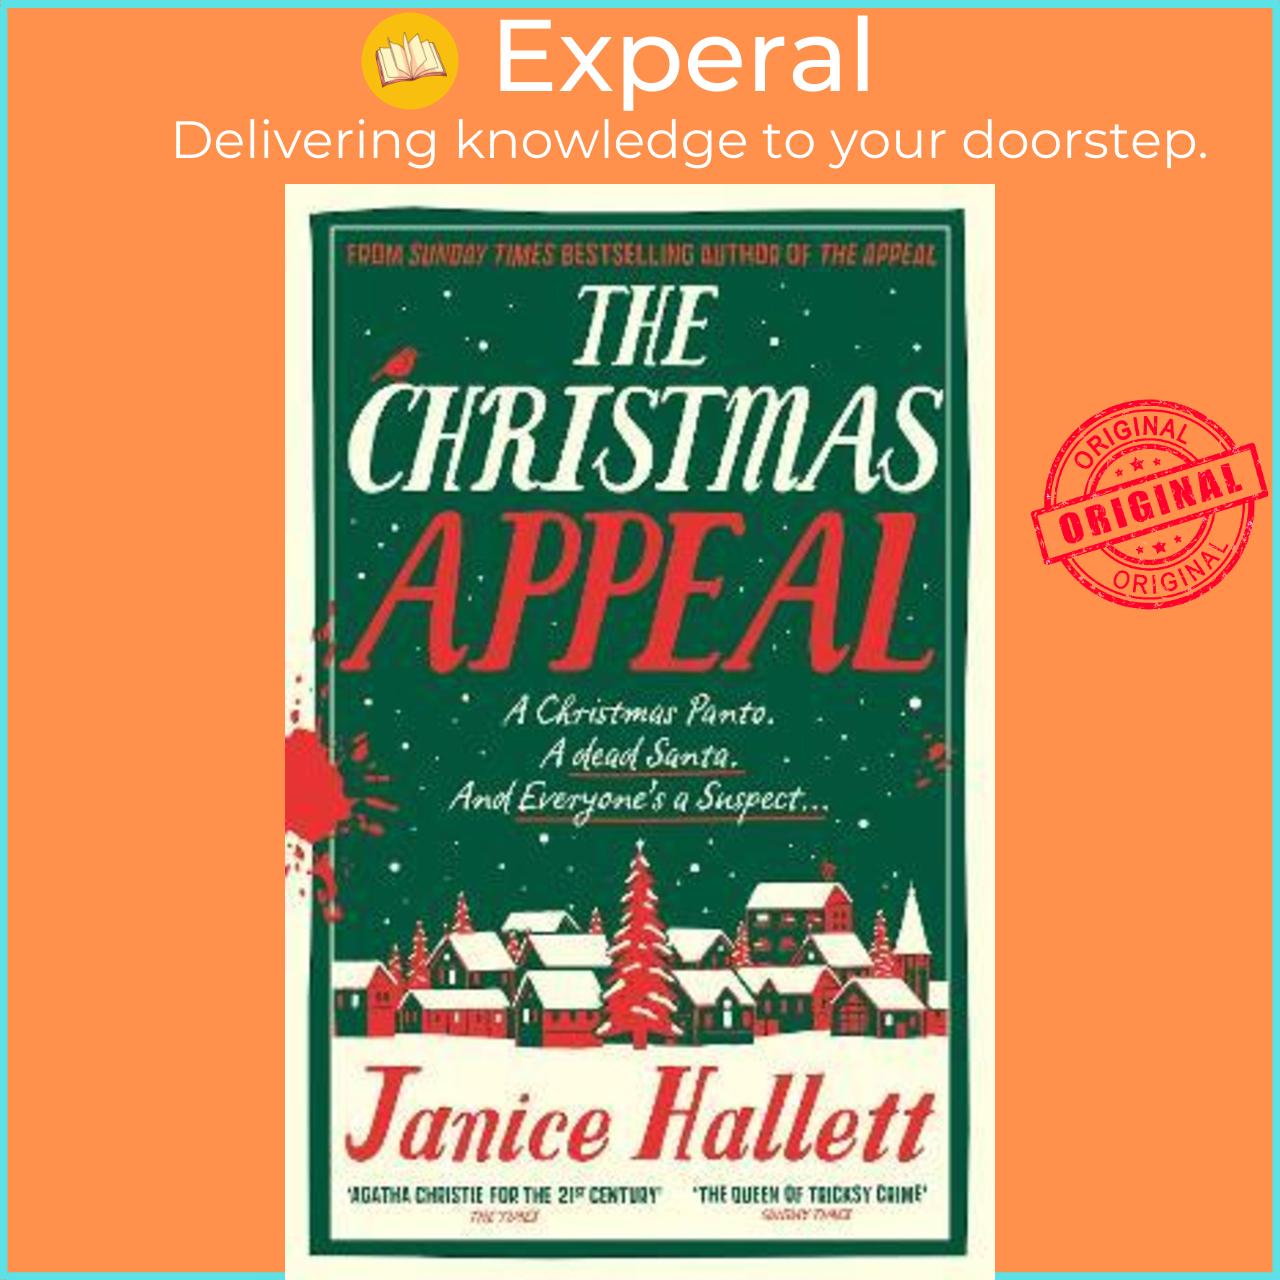 Sách - The Christmas Appeal : a fantastic festive murder mystery from the best by Janice Hallett (UK edition, hardcover)